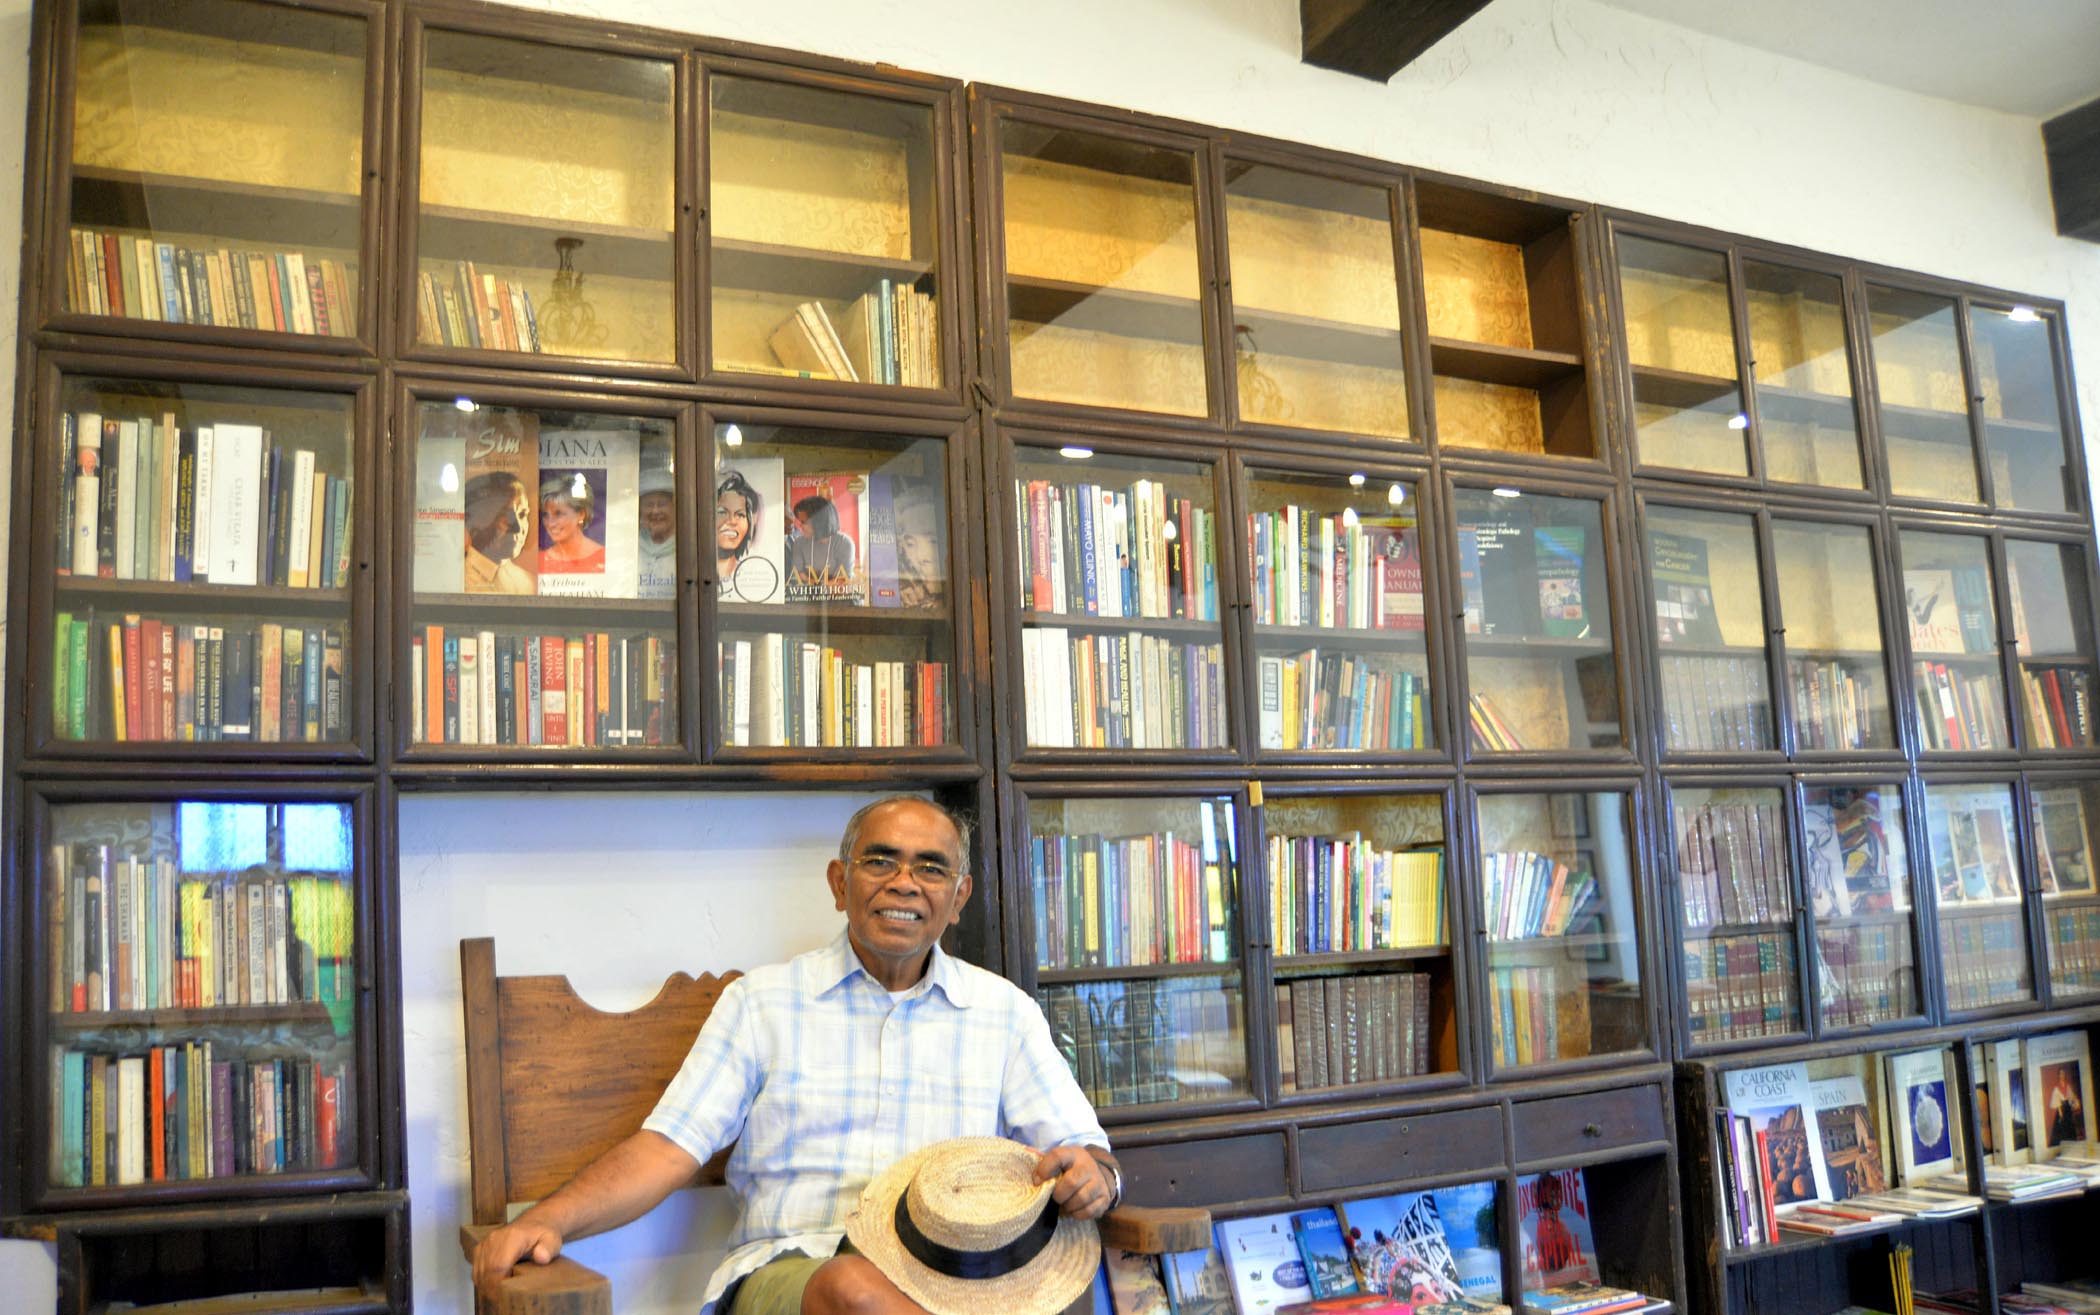 Dr Joven Cuanang in the Pinto Academy's reading room